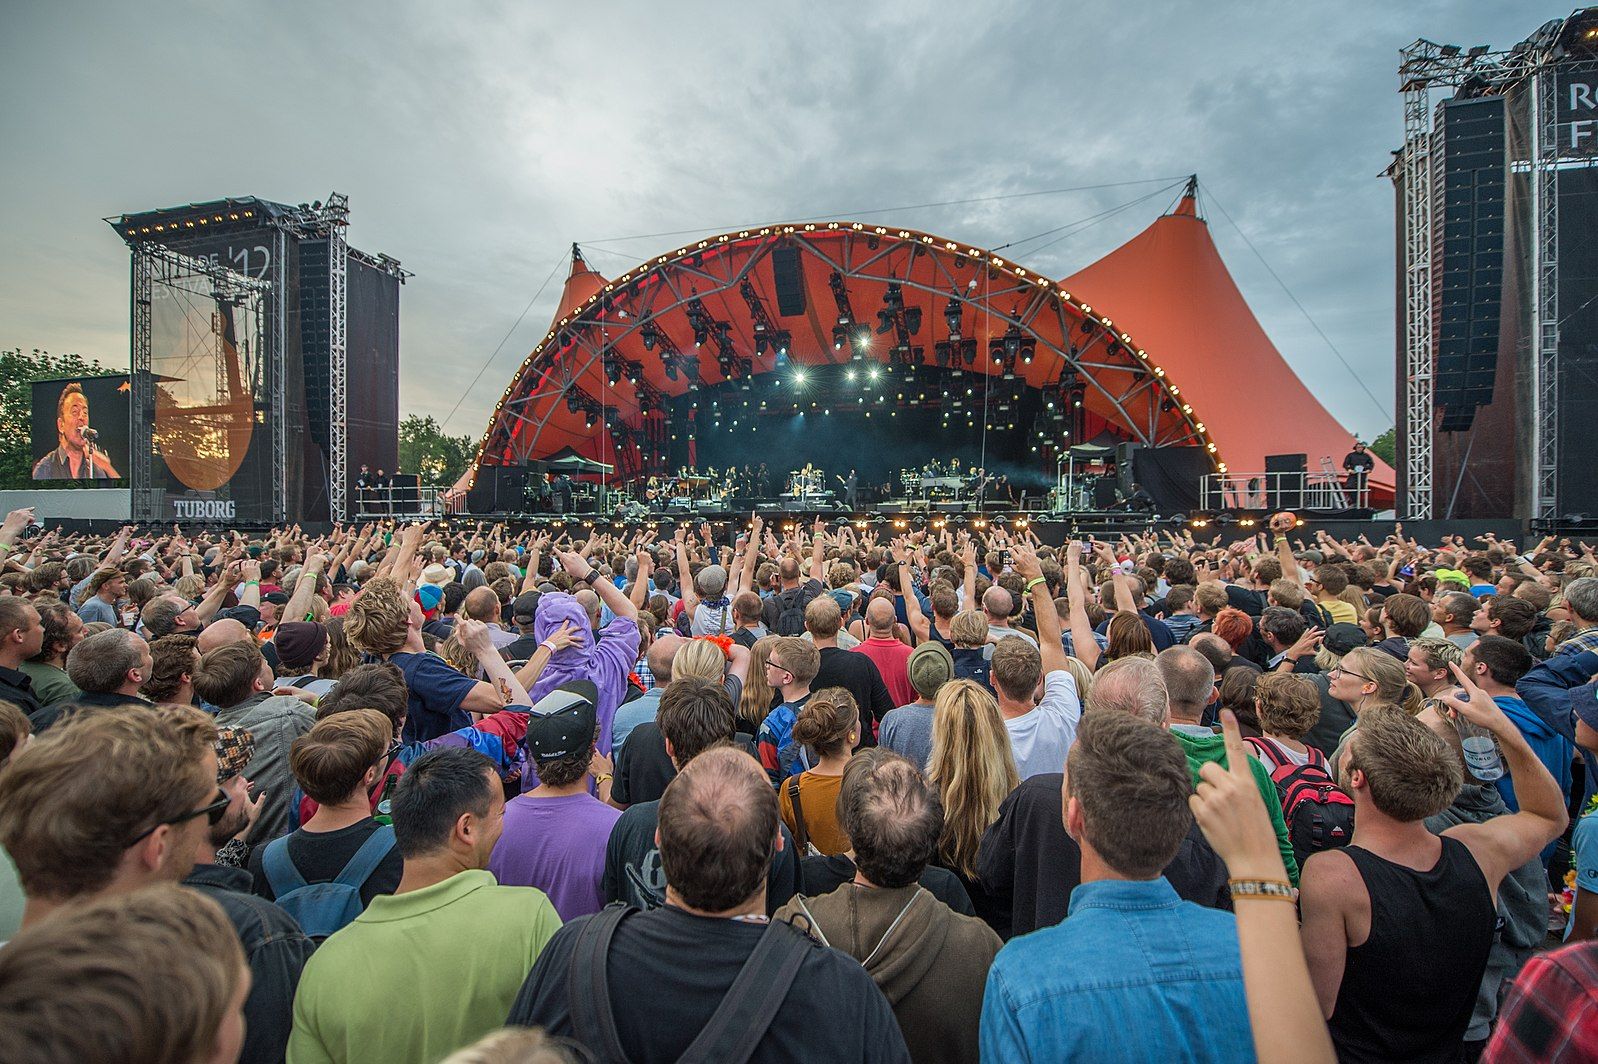 Orange dreams up in smoke: Roskilde and other festivals admit defeat and cancel en masse